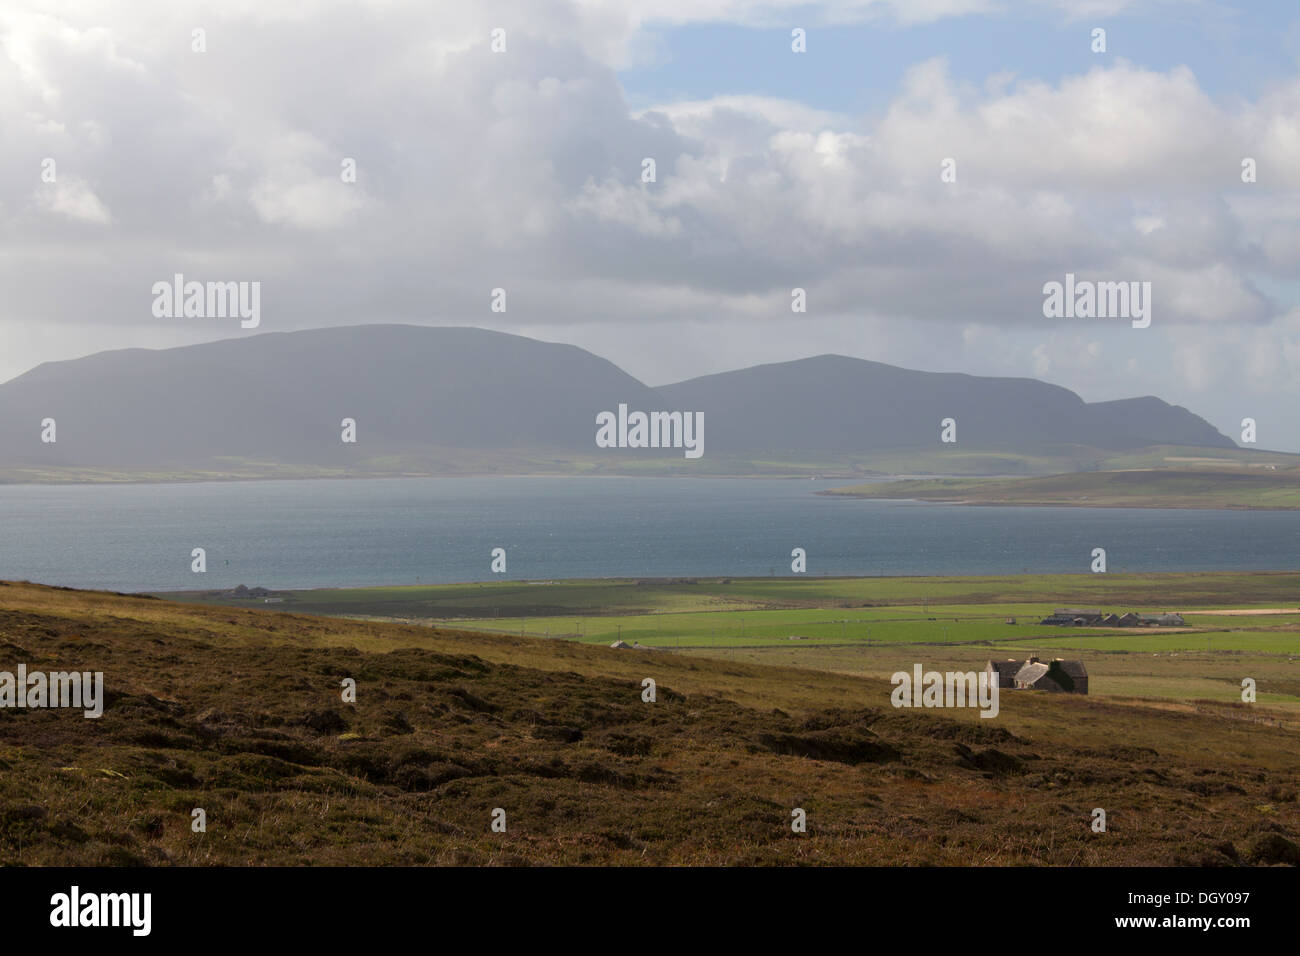 Islands of Orkney, Scotland. Picturesque elevated looking over Orkney’s Mainland towards the islands of Graemsay and Hoy. Stock Photo